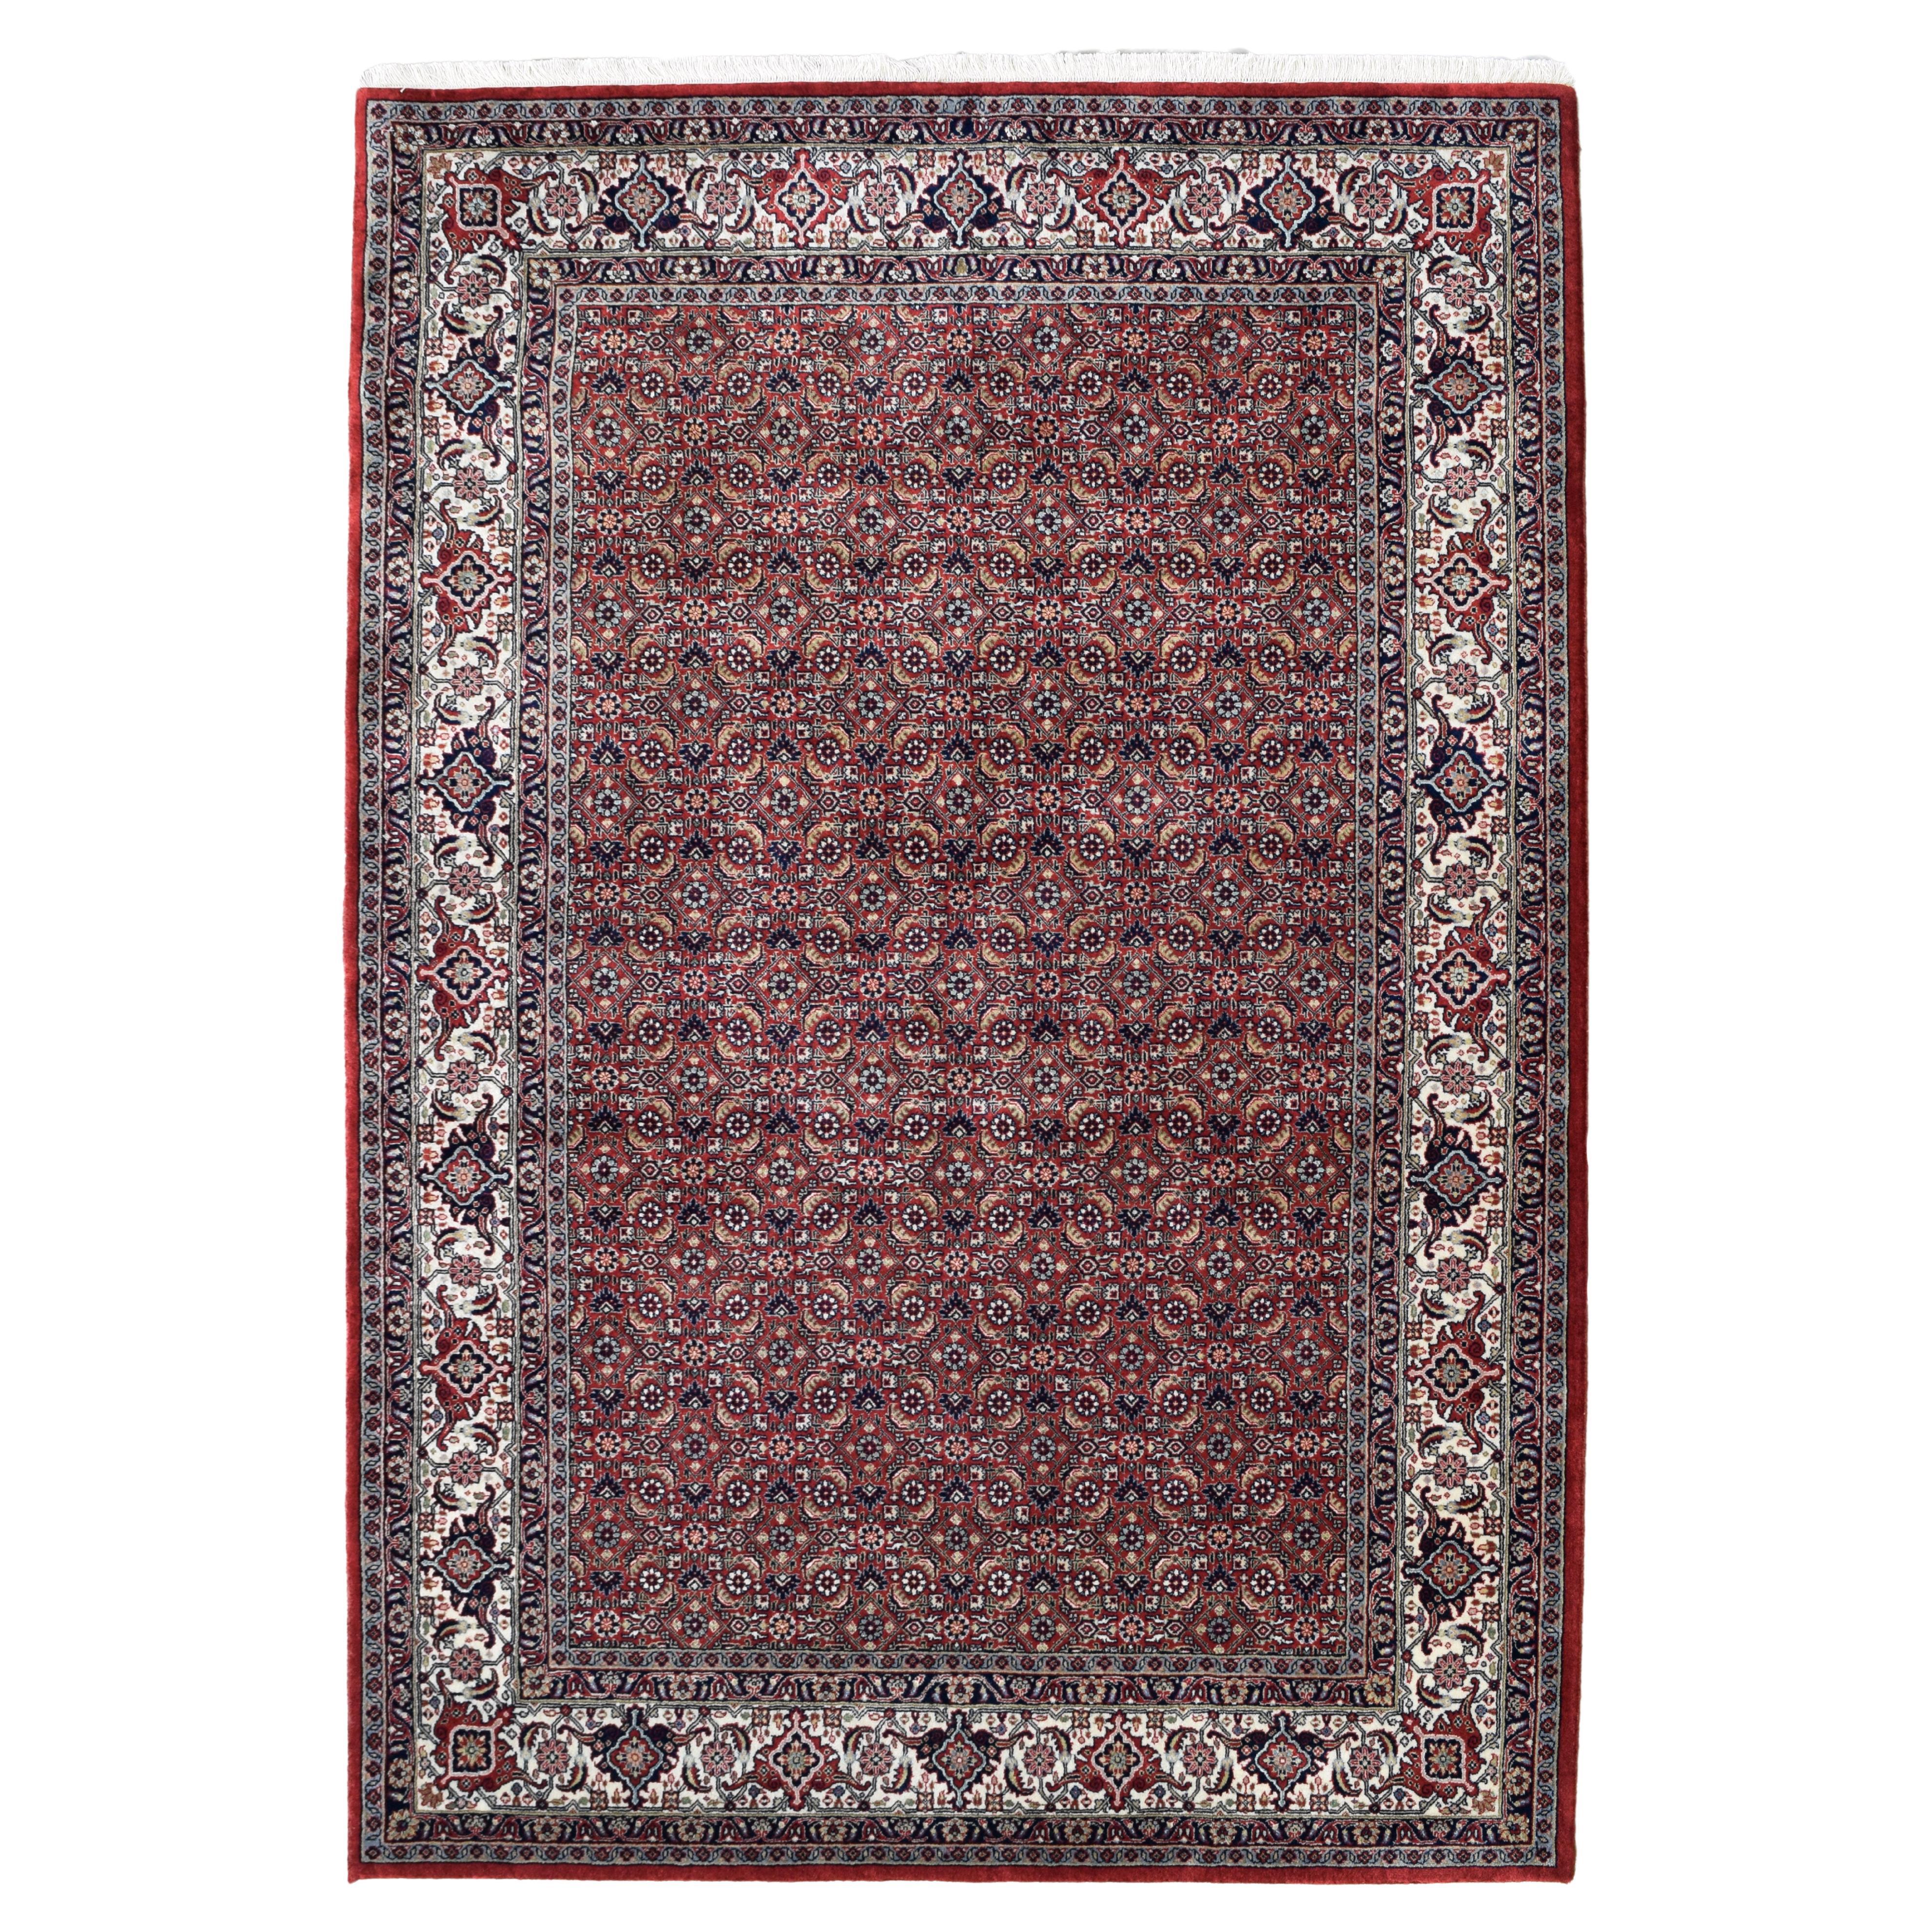 Classic Hand-Knotted Bidjar Carpet in Red, Indigo, and Cream Wool, 5' x 7' For Sale